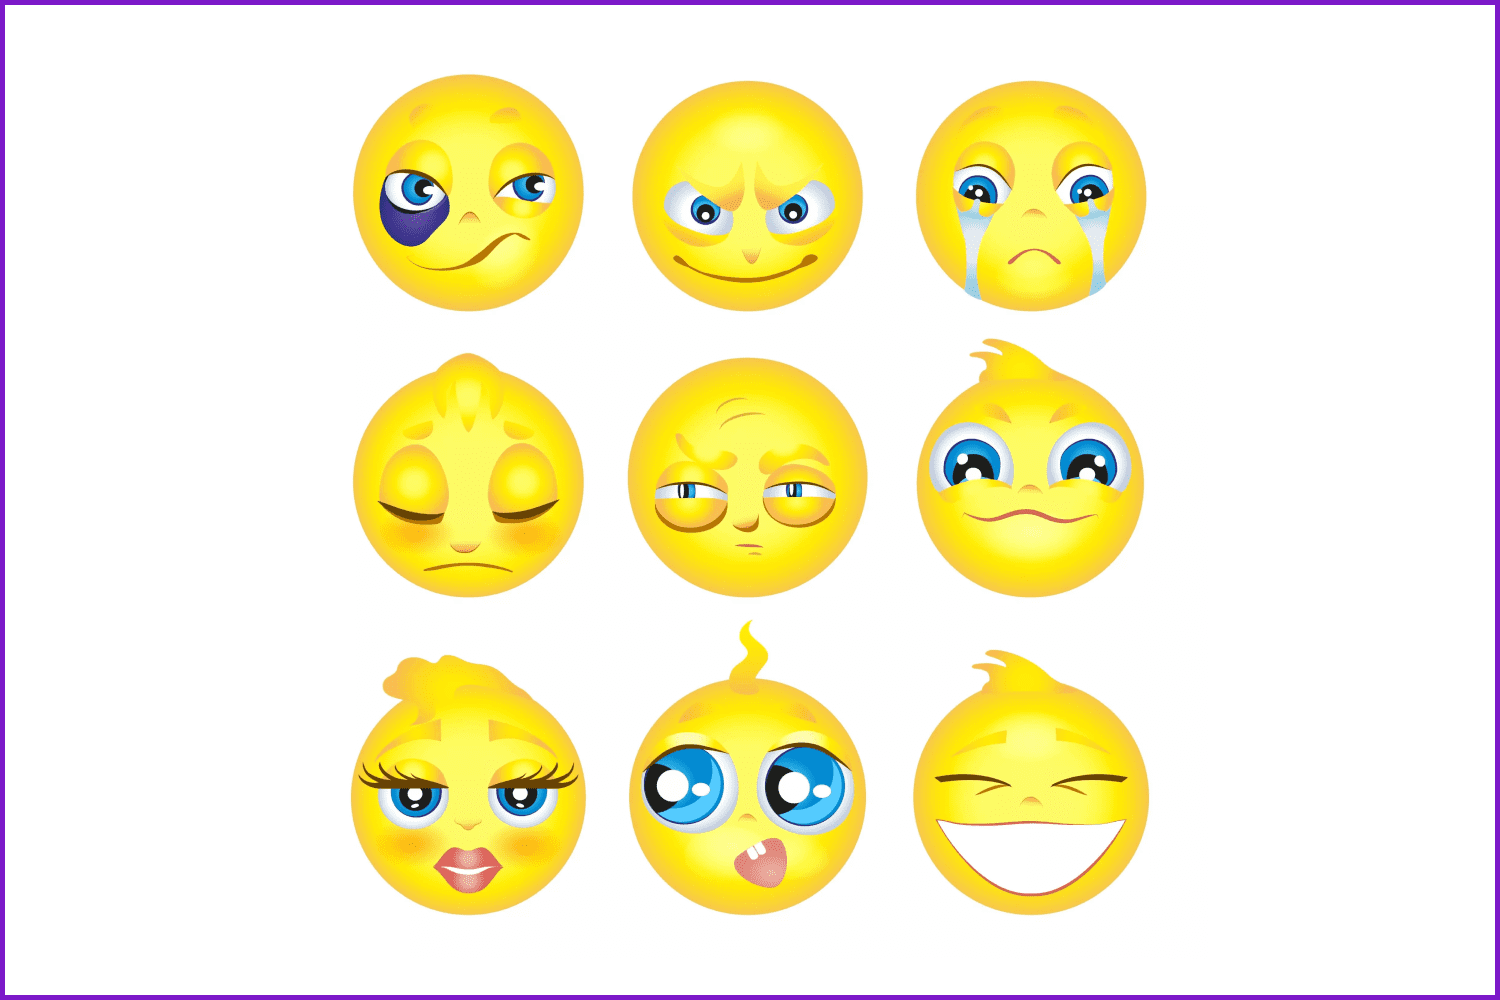 Images of painted yellow emoticons with different emotions.